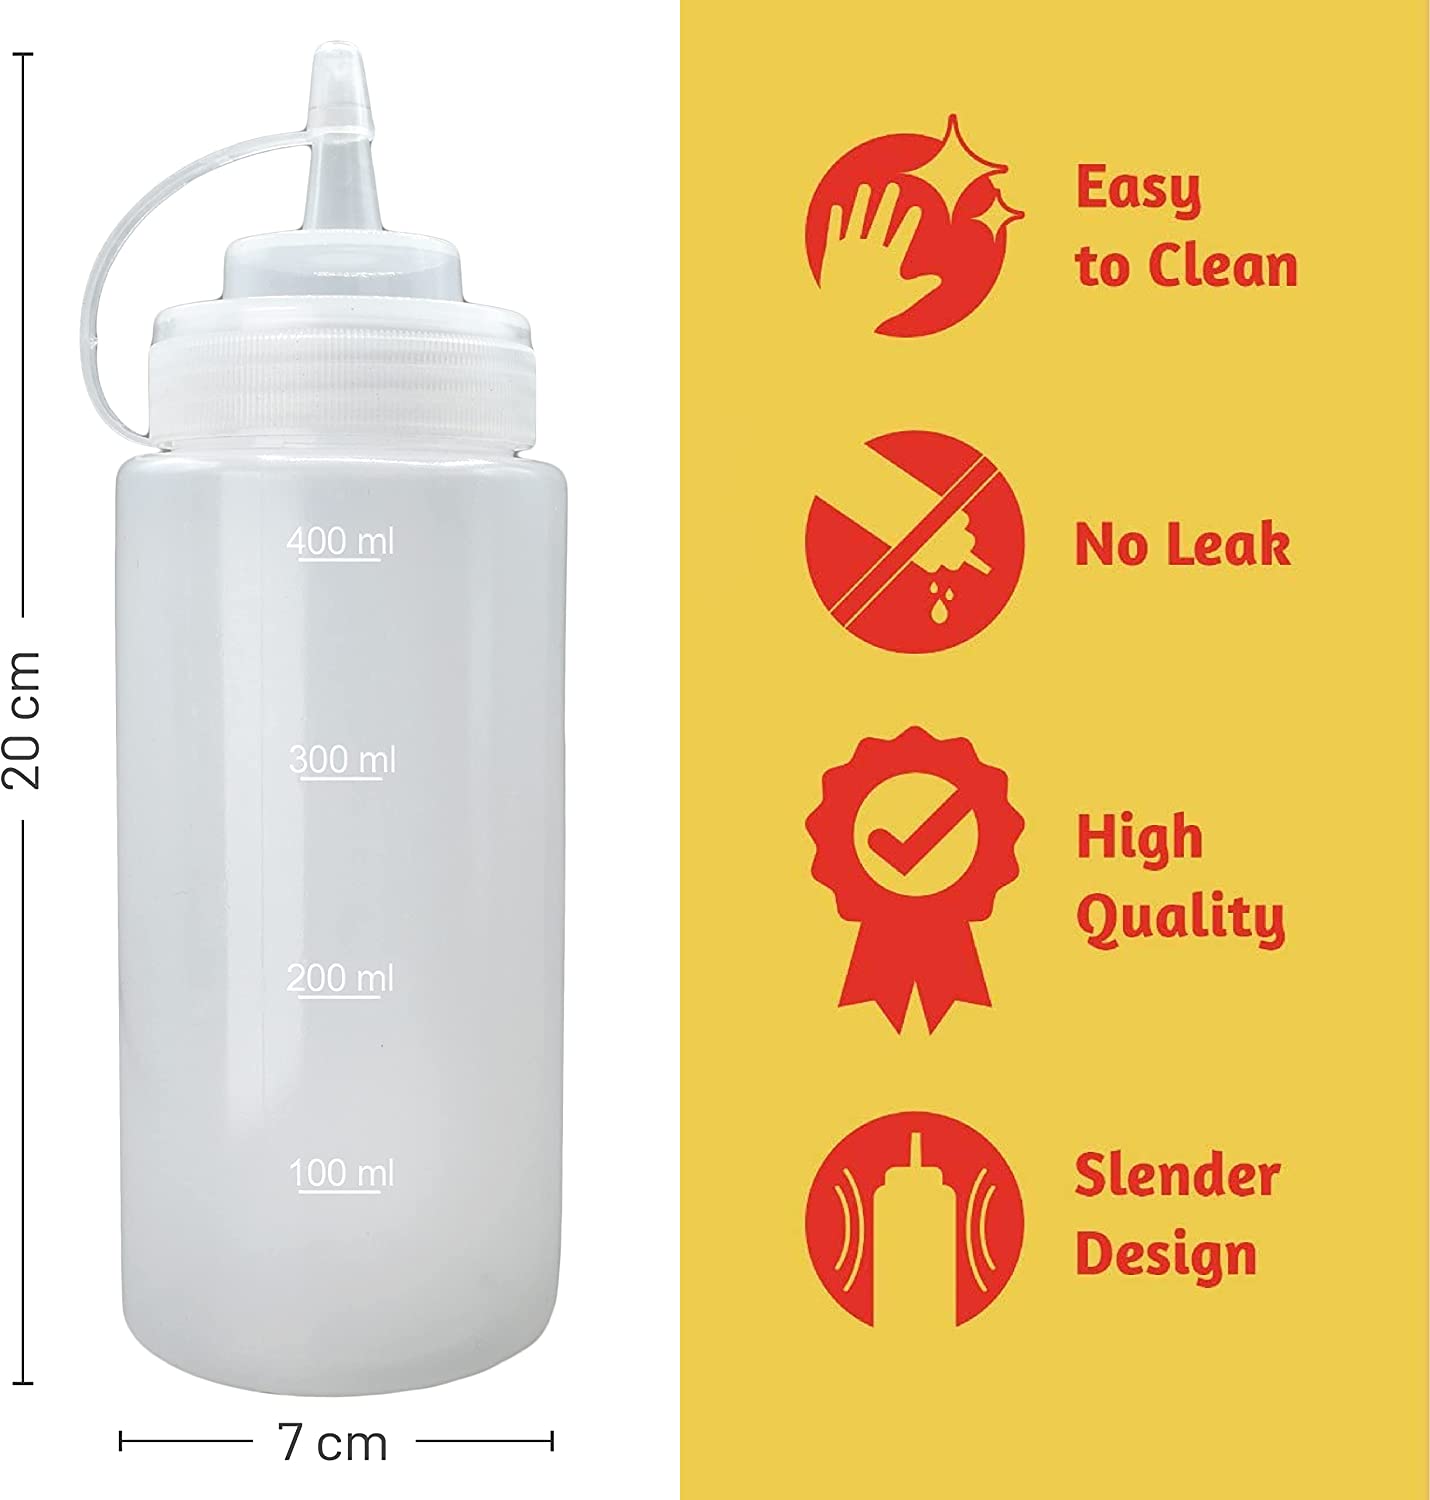 Squeezy Bottle 415ml Product Feature